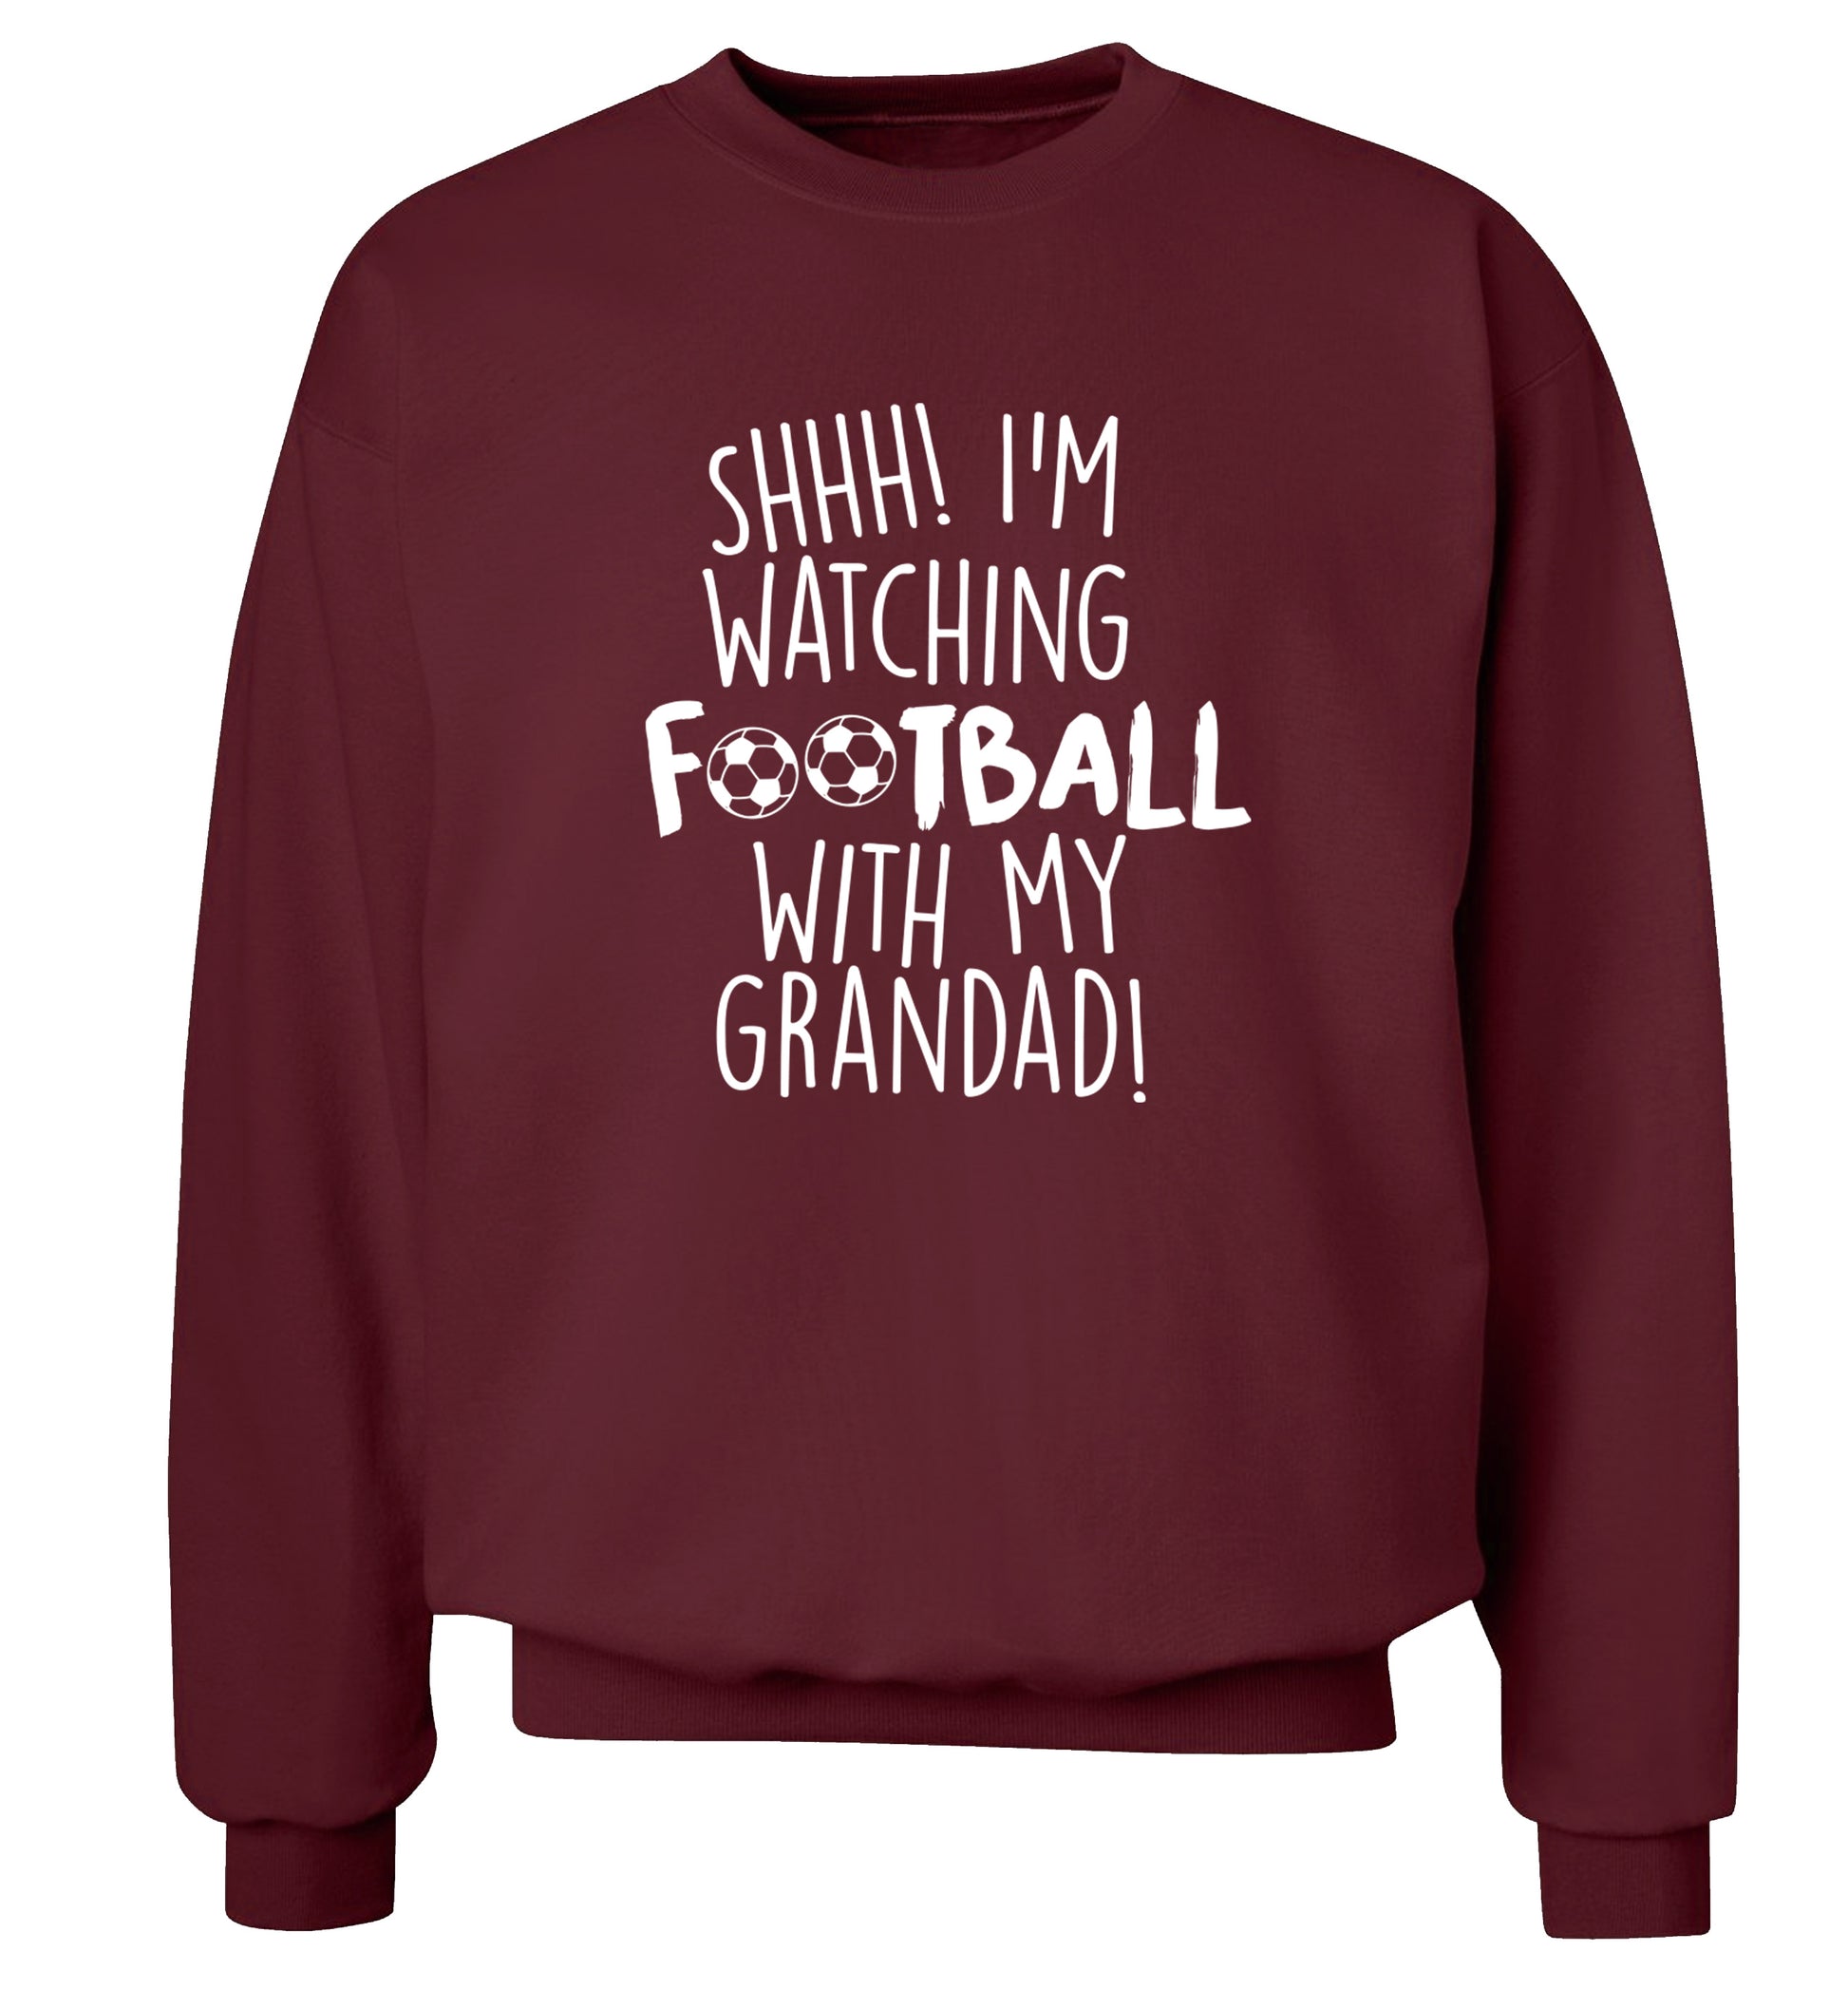 Shhh I'm watching football with my grandad Adult's unisexmaroon Sweater 2XL